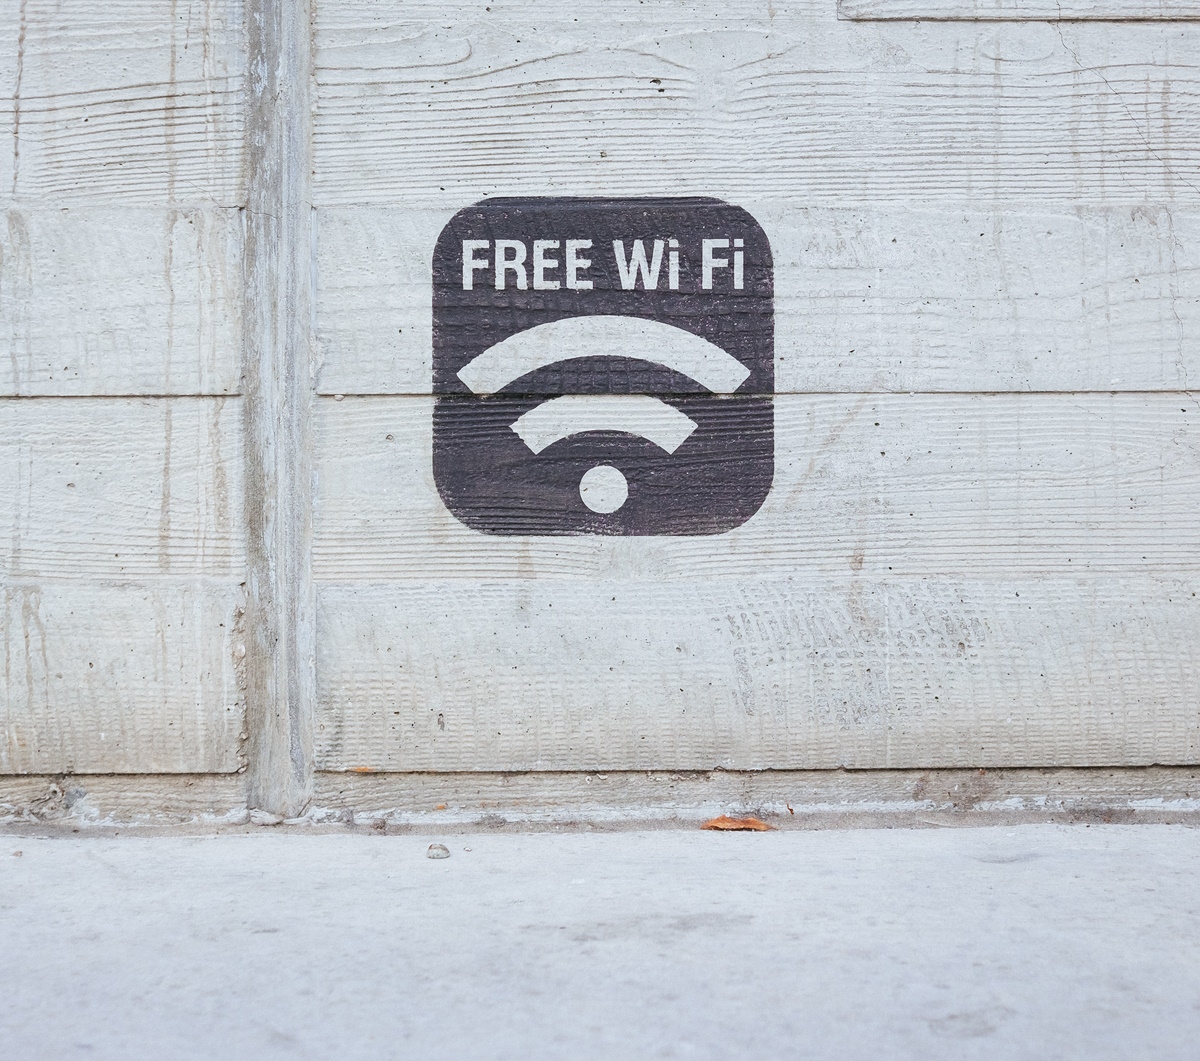 How to stay safe while using public Wi-Fi